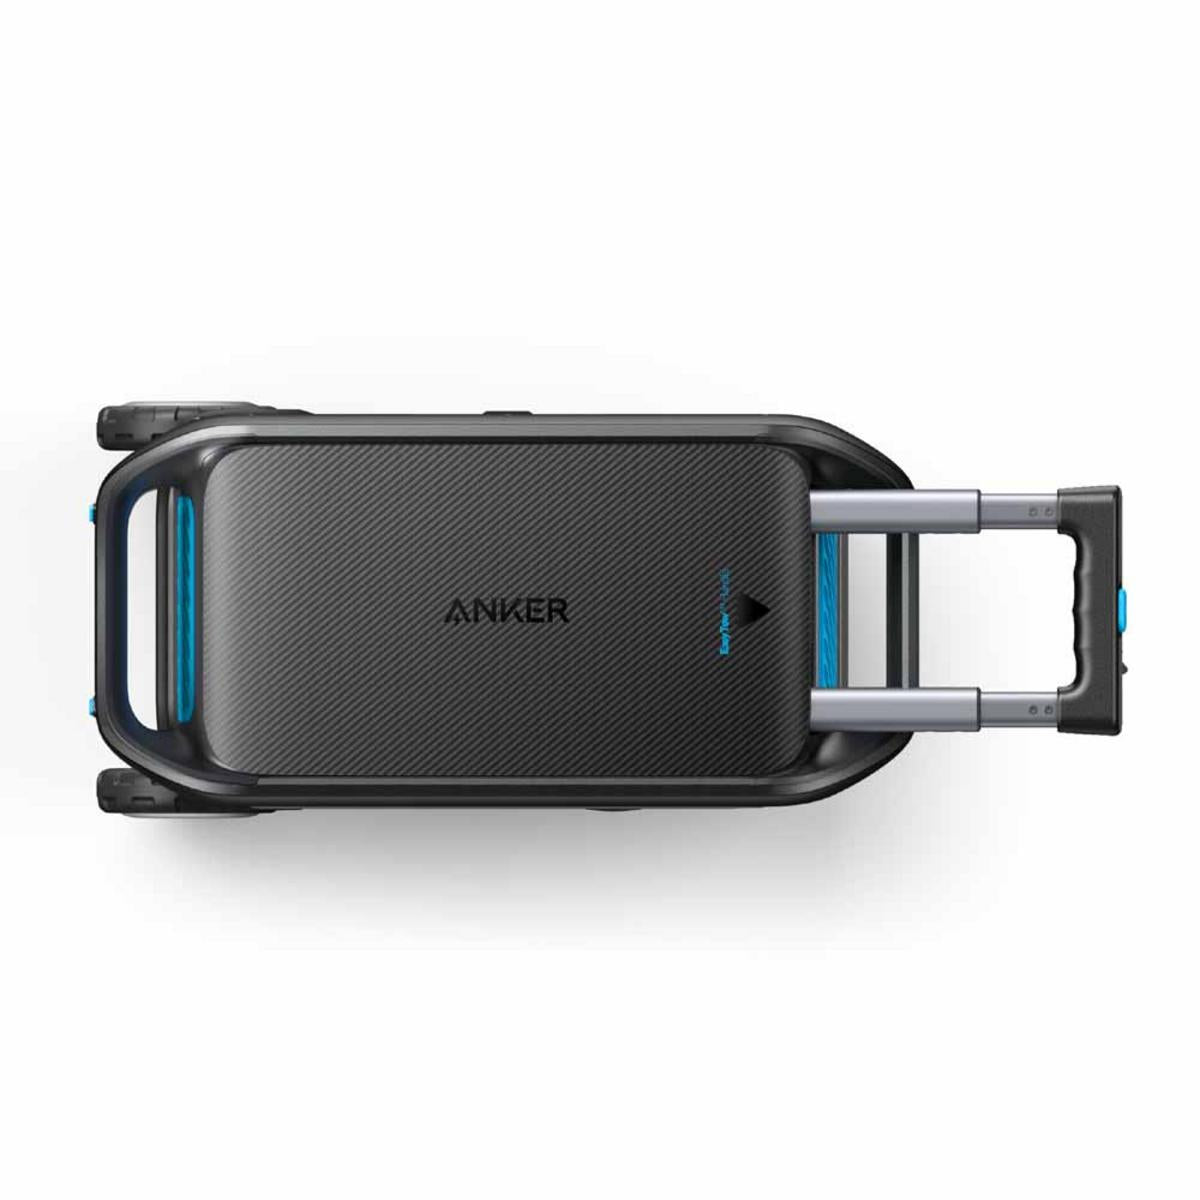 Anker PowerHouse 767 with Expansion Battery - 2400W/4096Wh